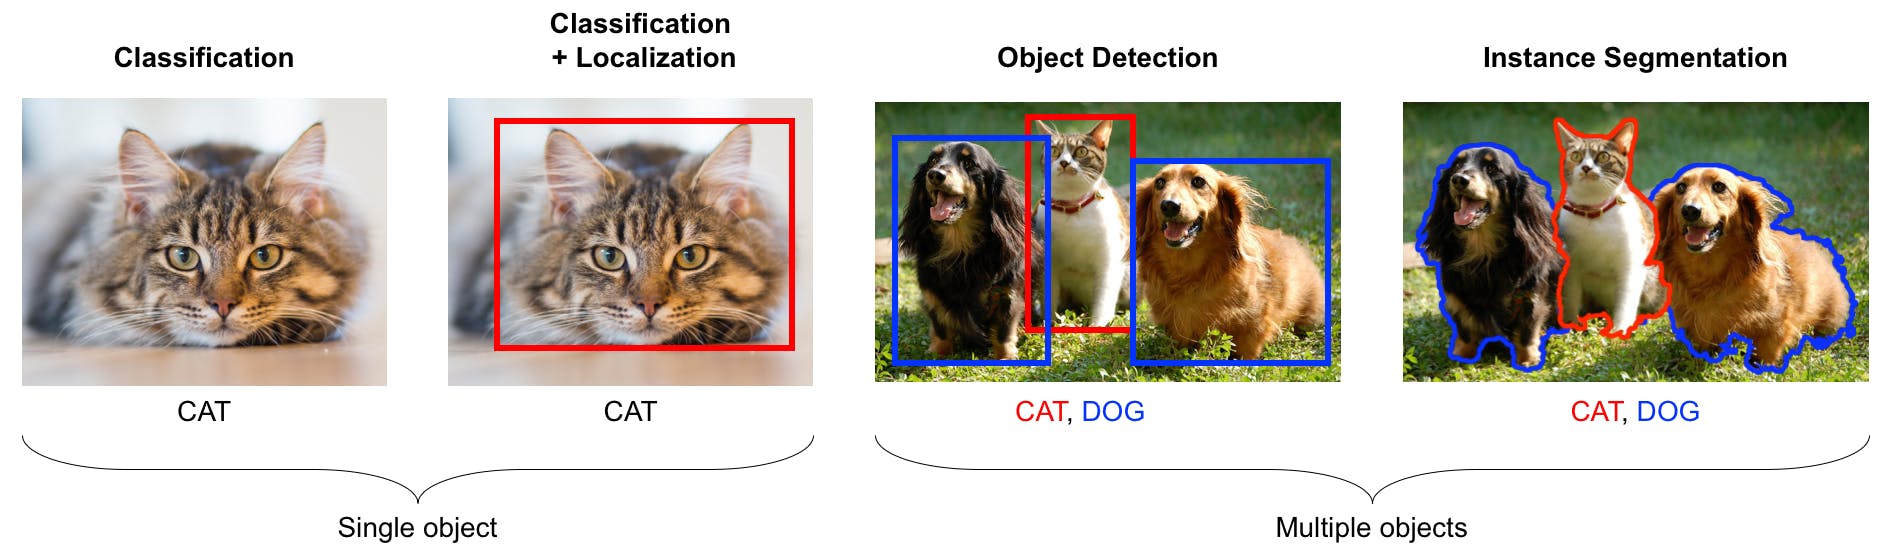 Representation of Classification, object detection and instance segmentation in Computer Vision practices